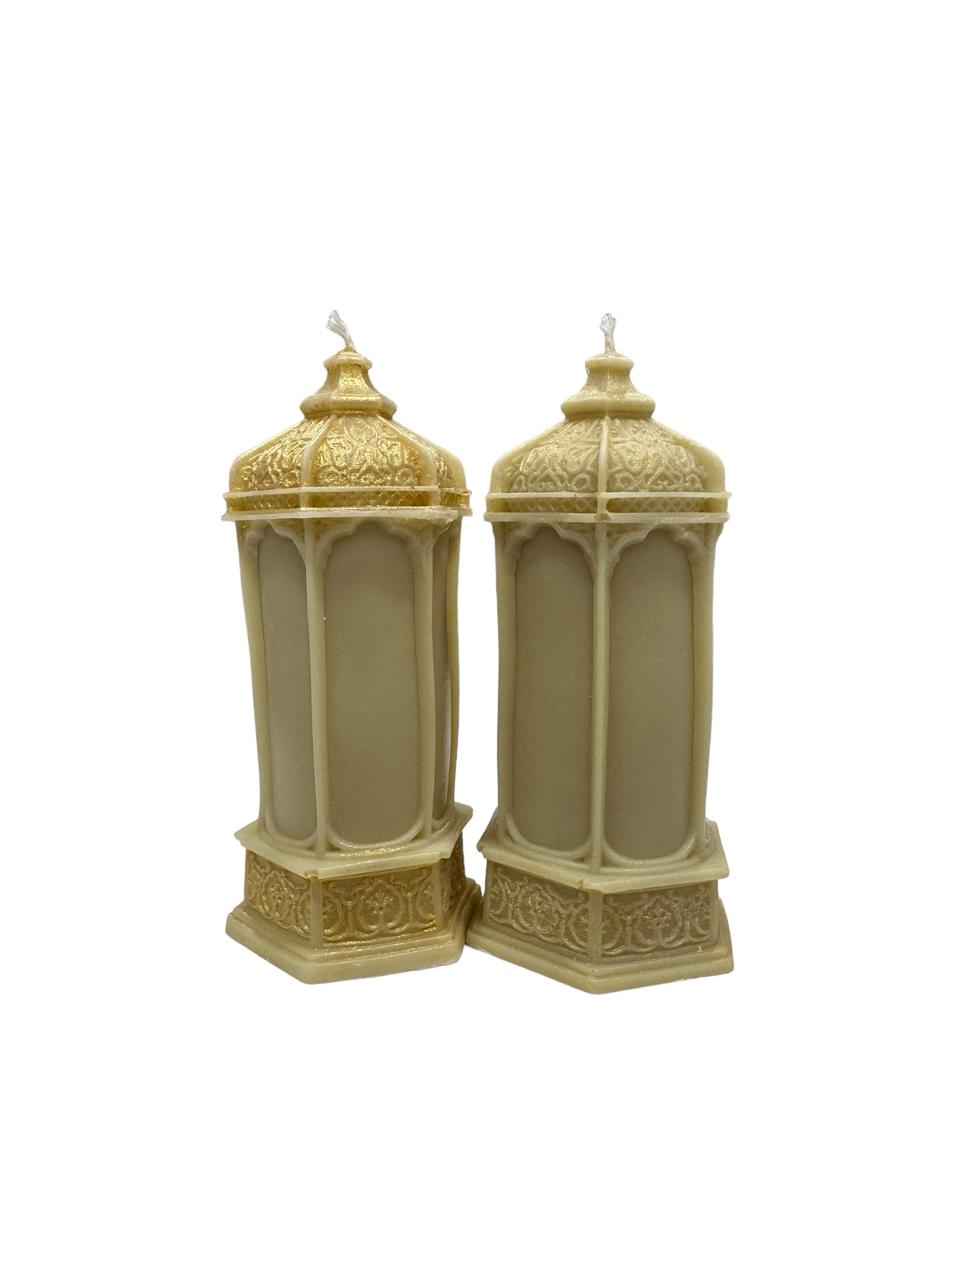 Vintage Scented Candle, 1 Each: A pair of elegant, vintage-design scented candles on a white background.